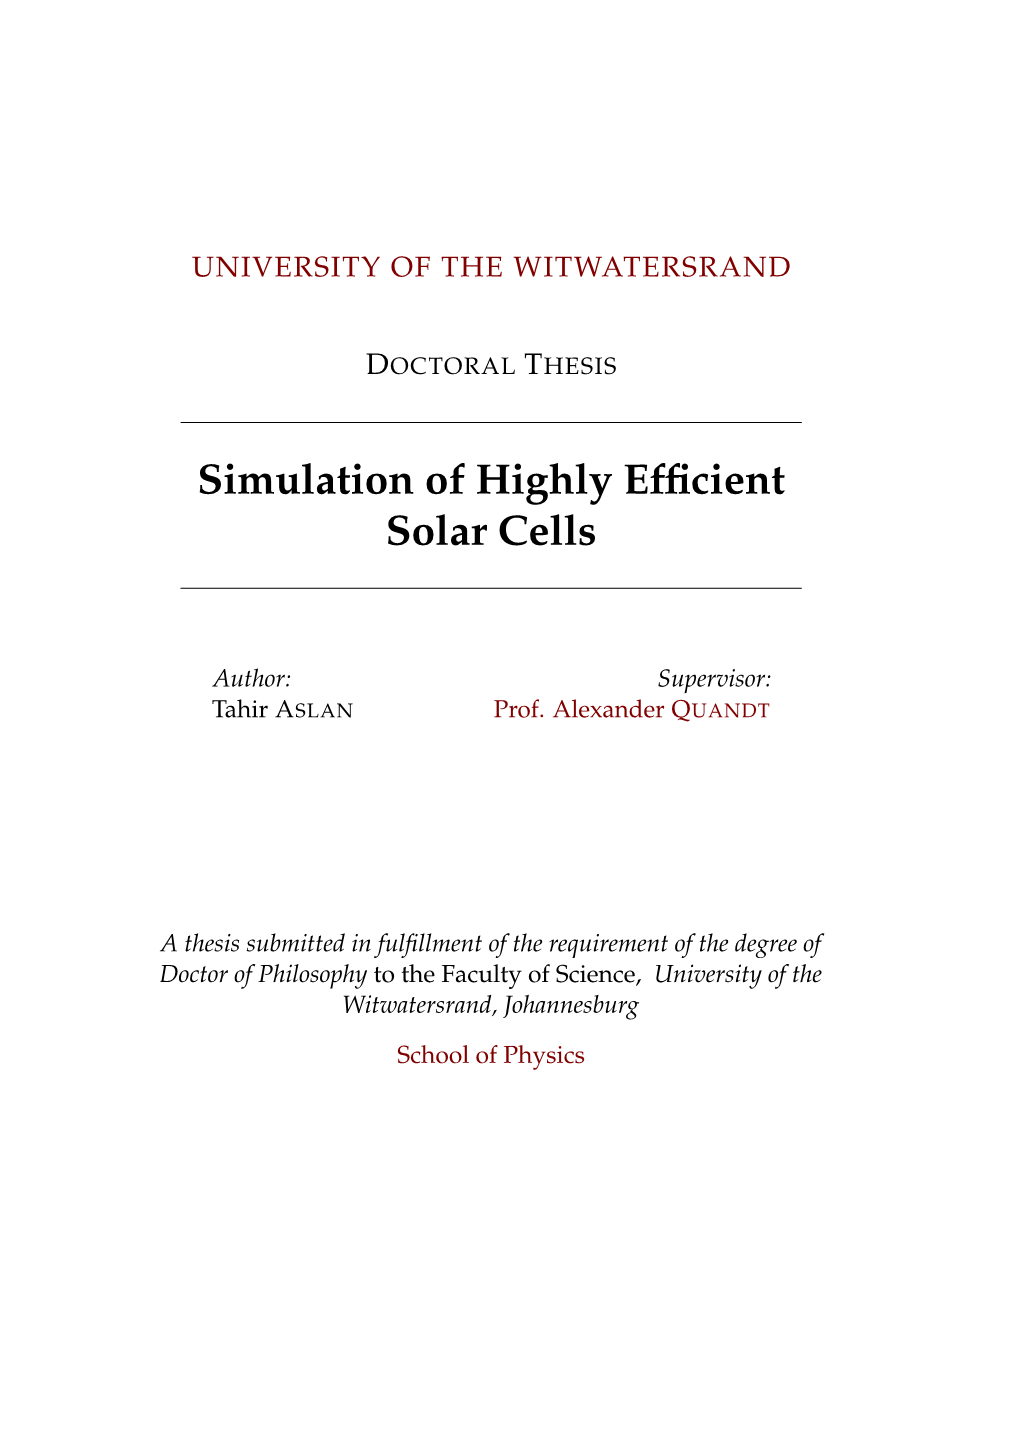 Simulation of Highly Efficient Solar Cells